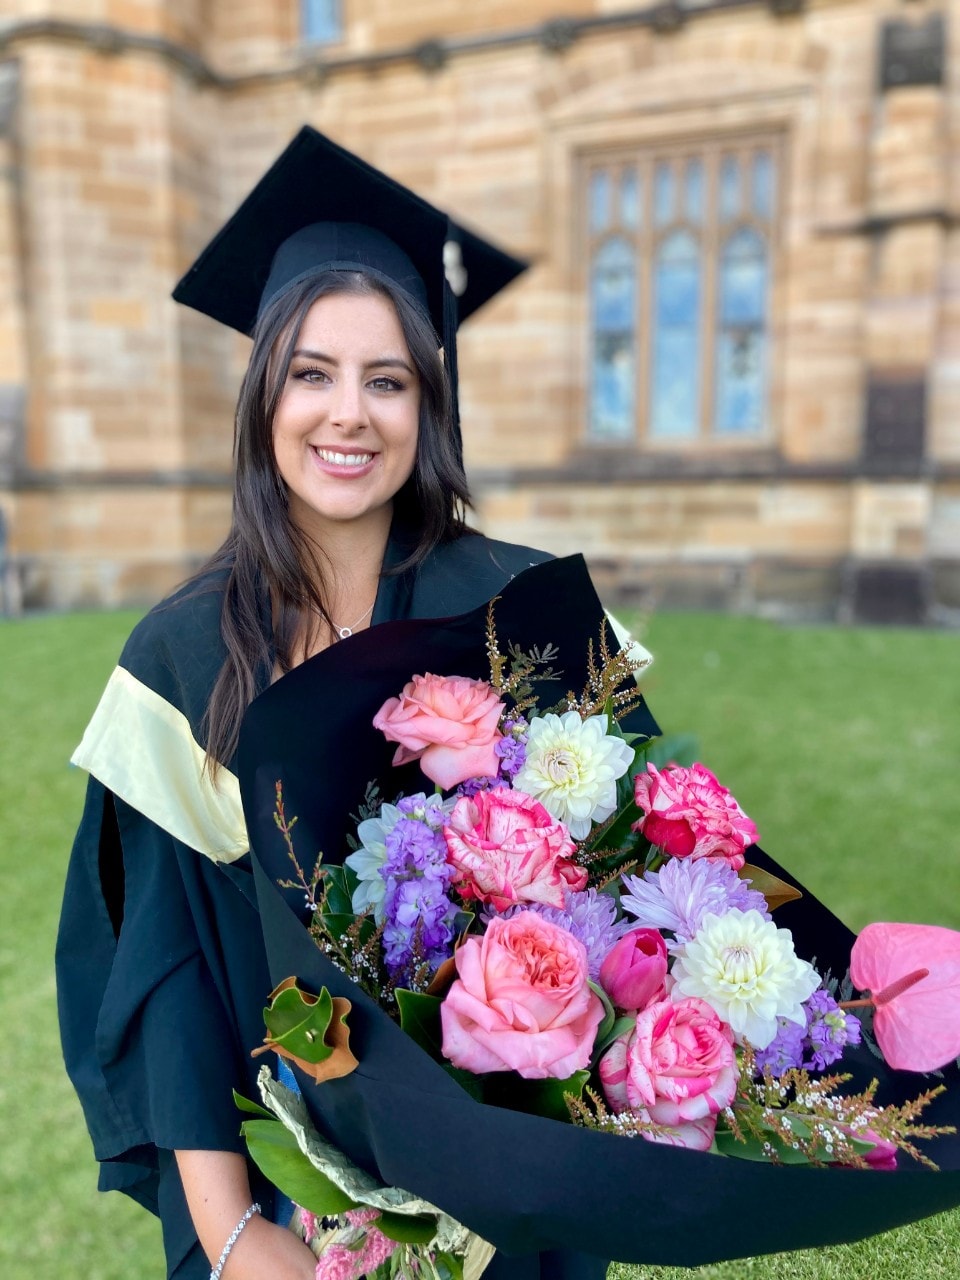 Maddi Eveleigh at her graduation ceremony, wearing graduation regalia and holding a bunch of flowers